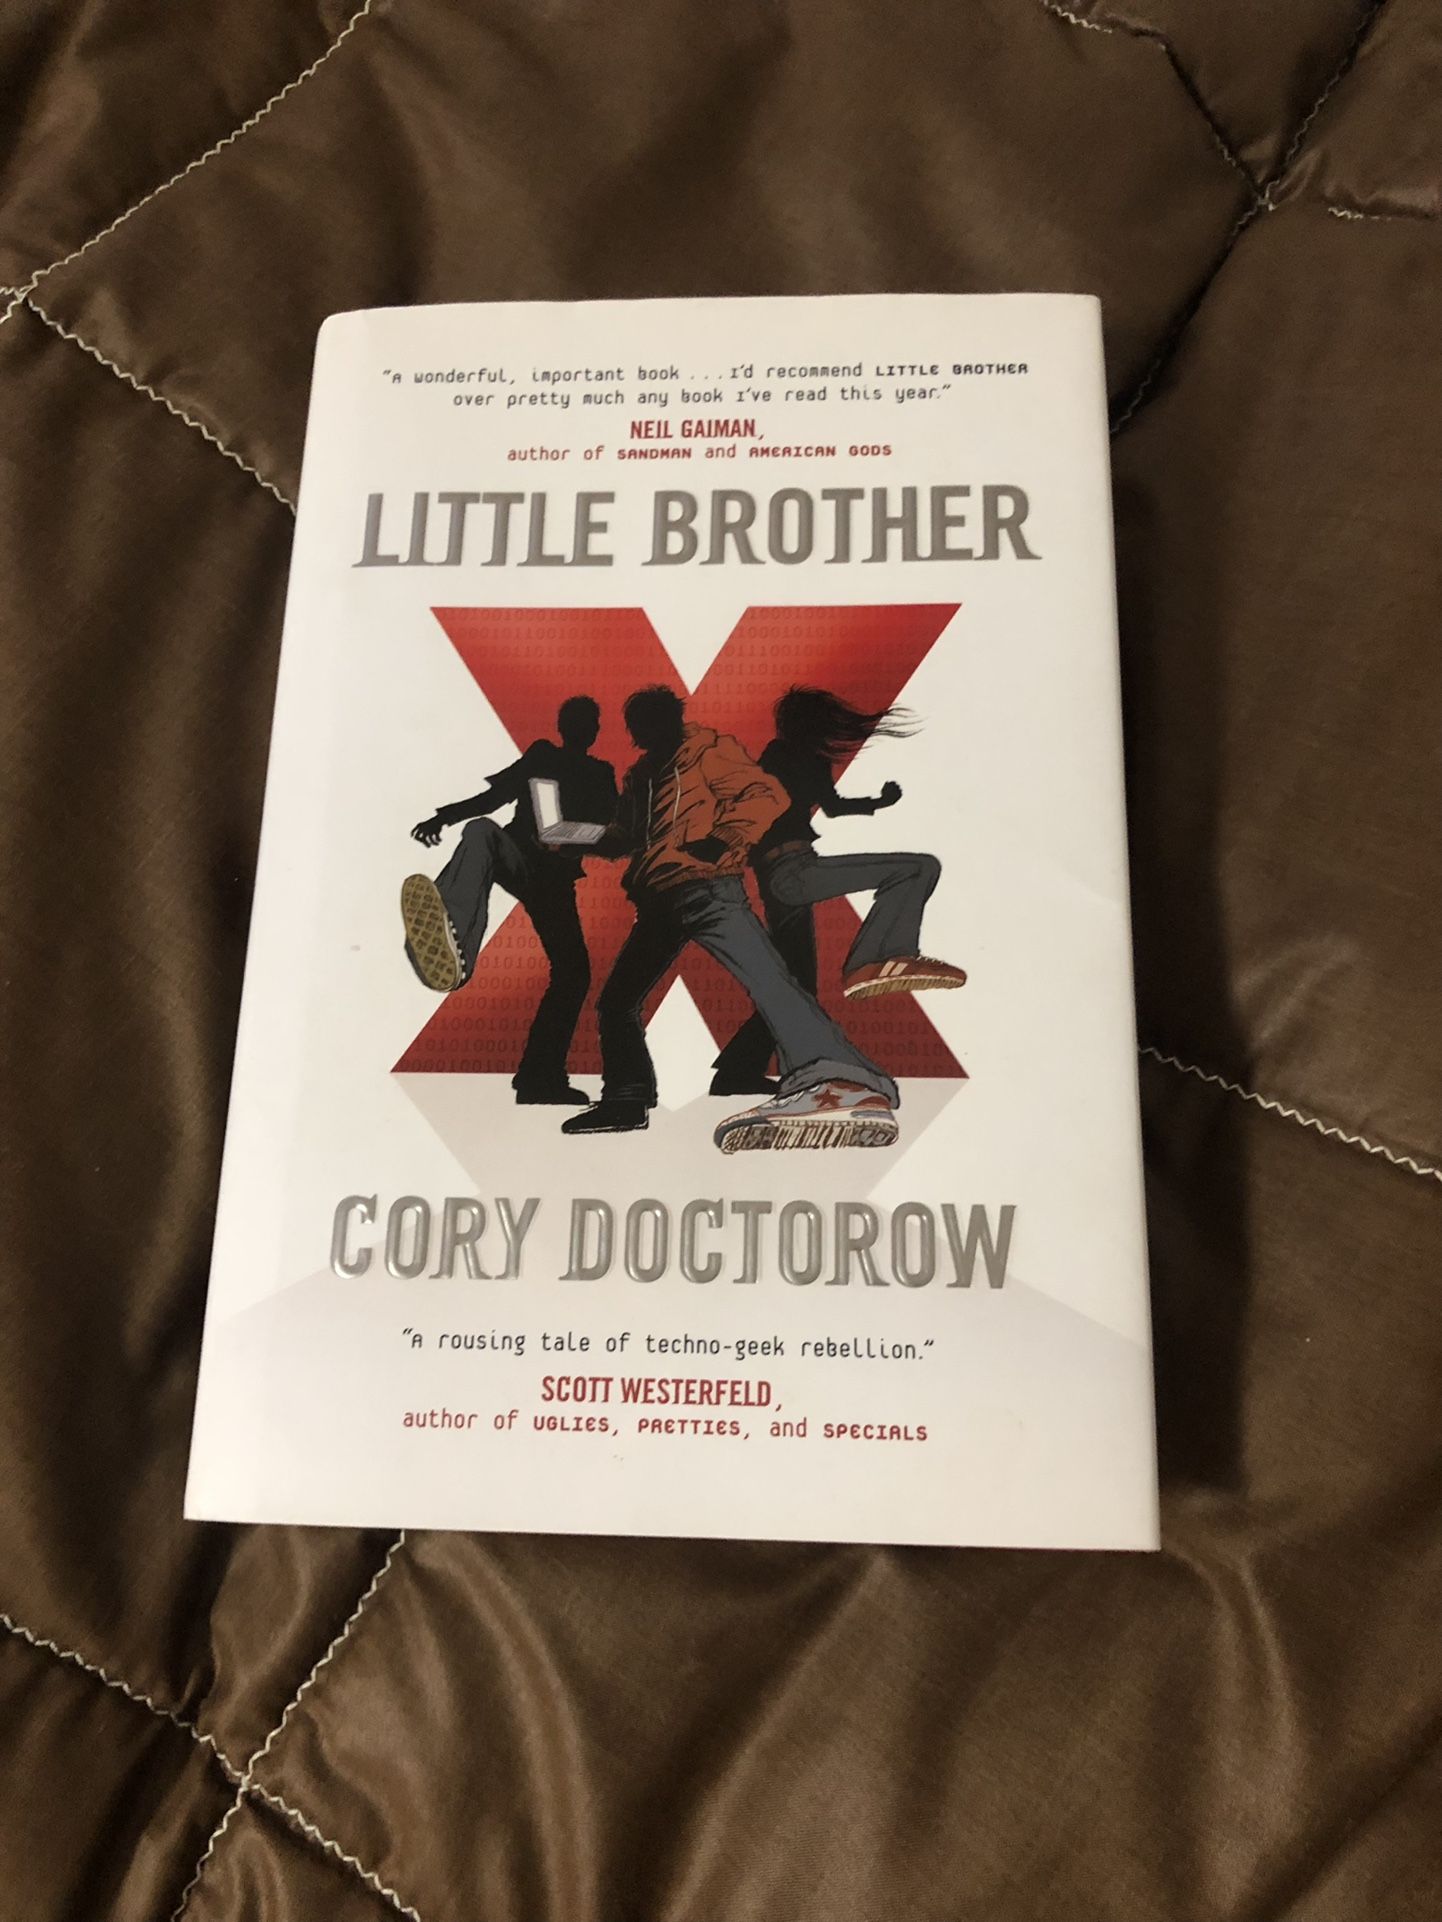 Little Brother by Cory Doctorow (hardcover)